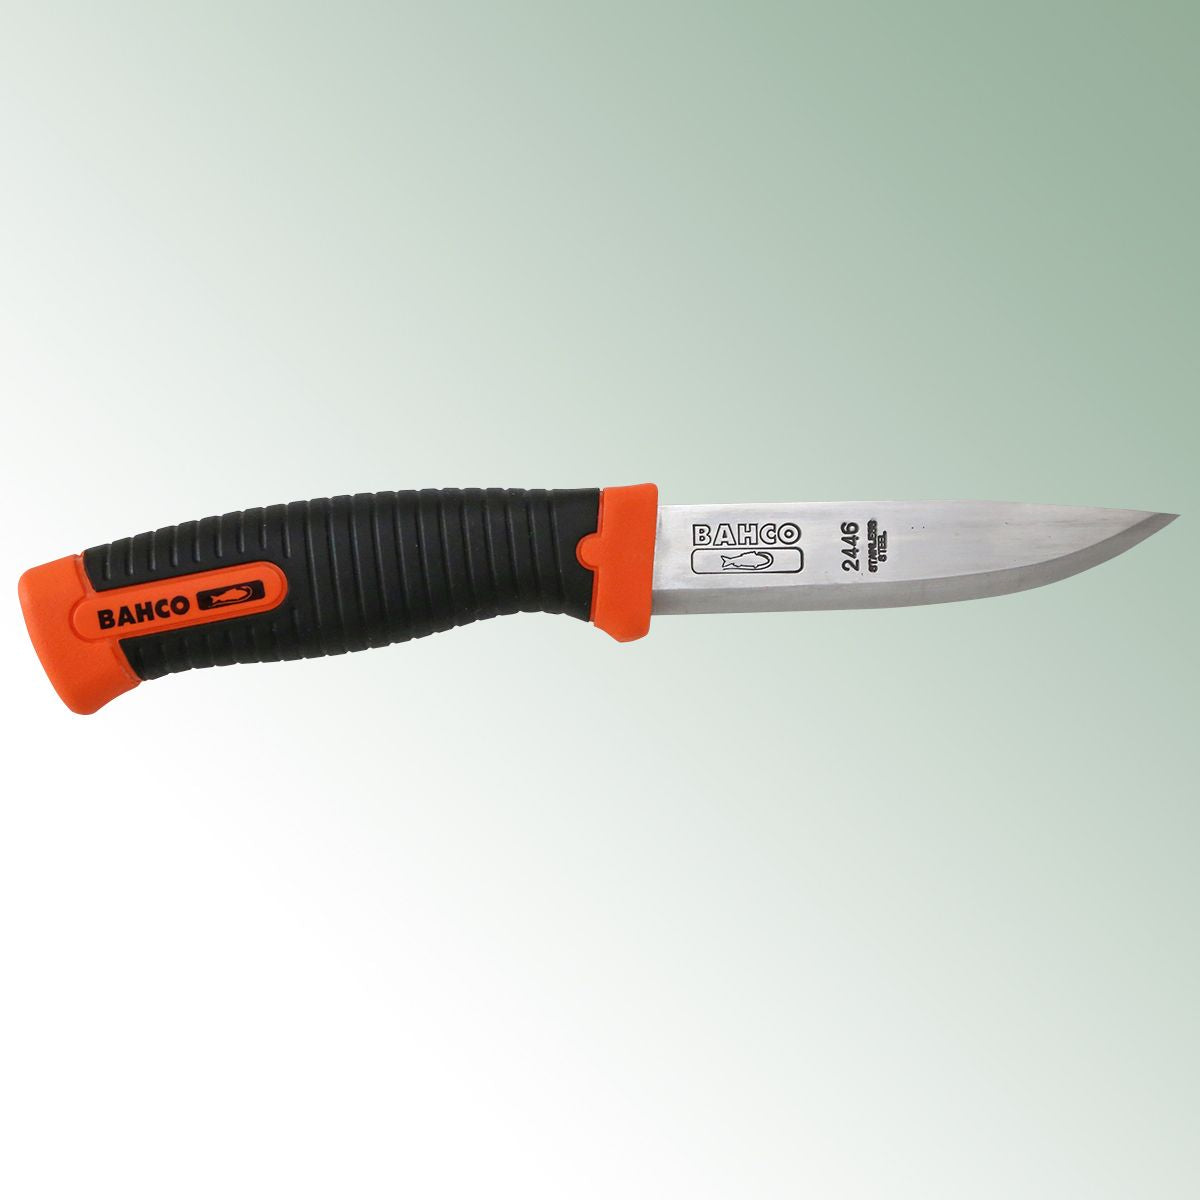 Bahco Professional Knife